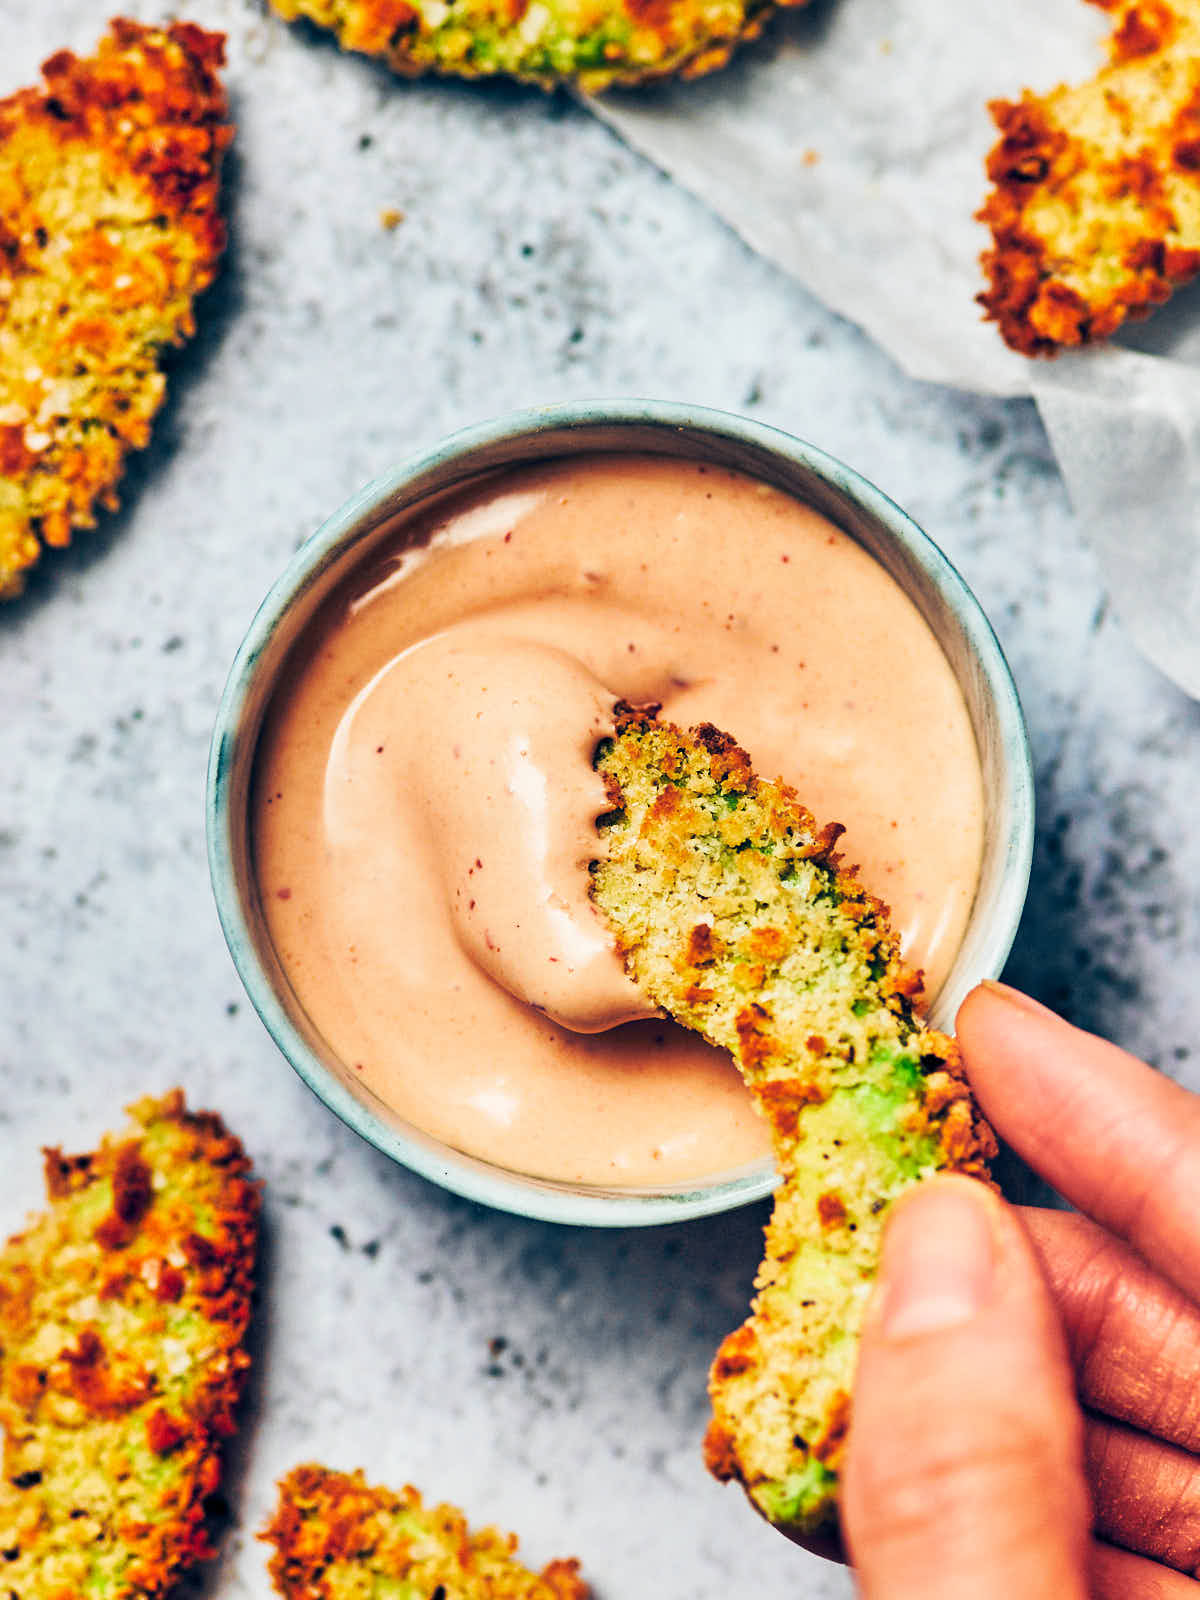 A crispy avocado fry being dipped into vegan chipotle mayo